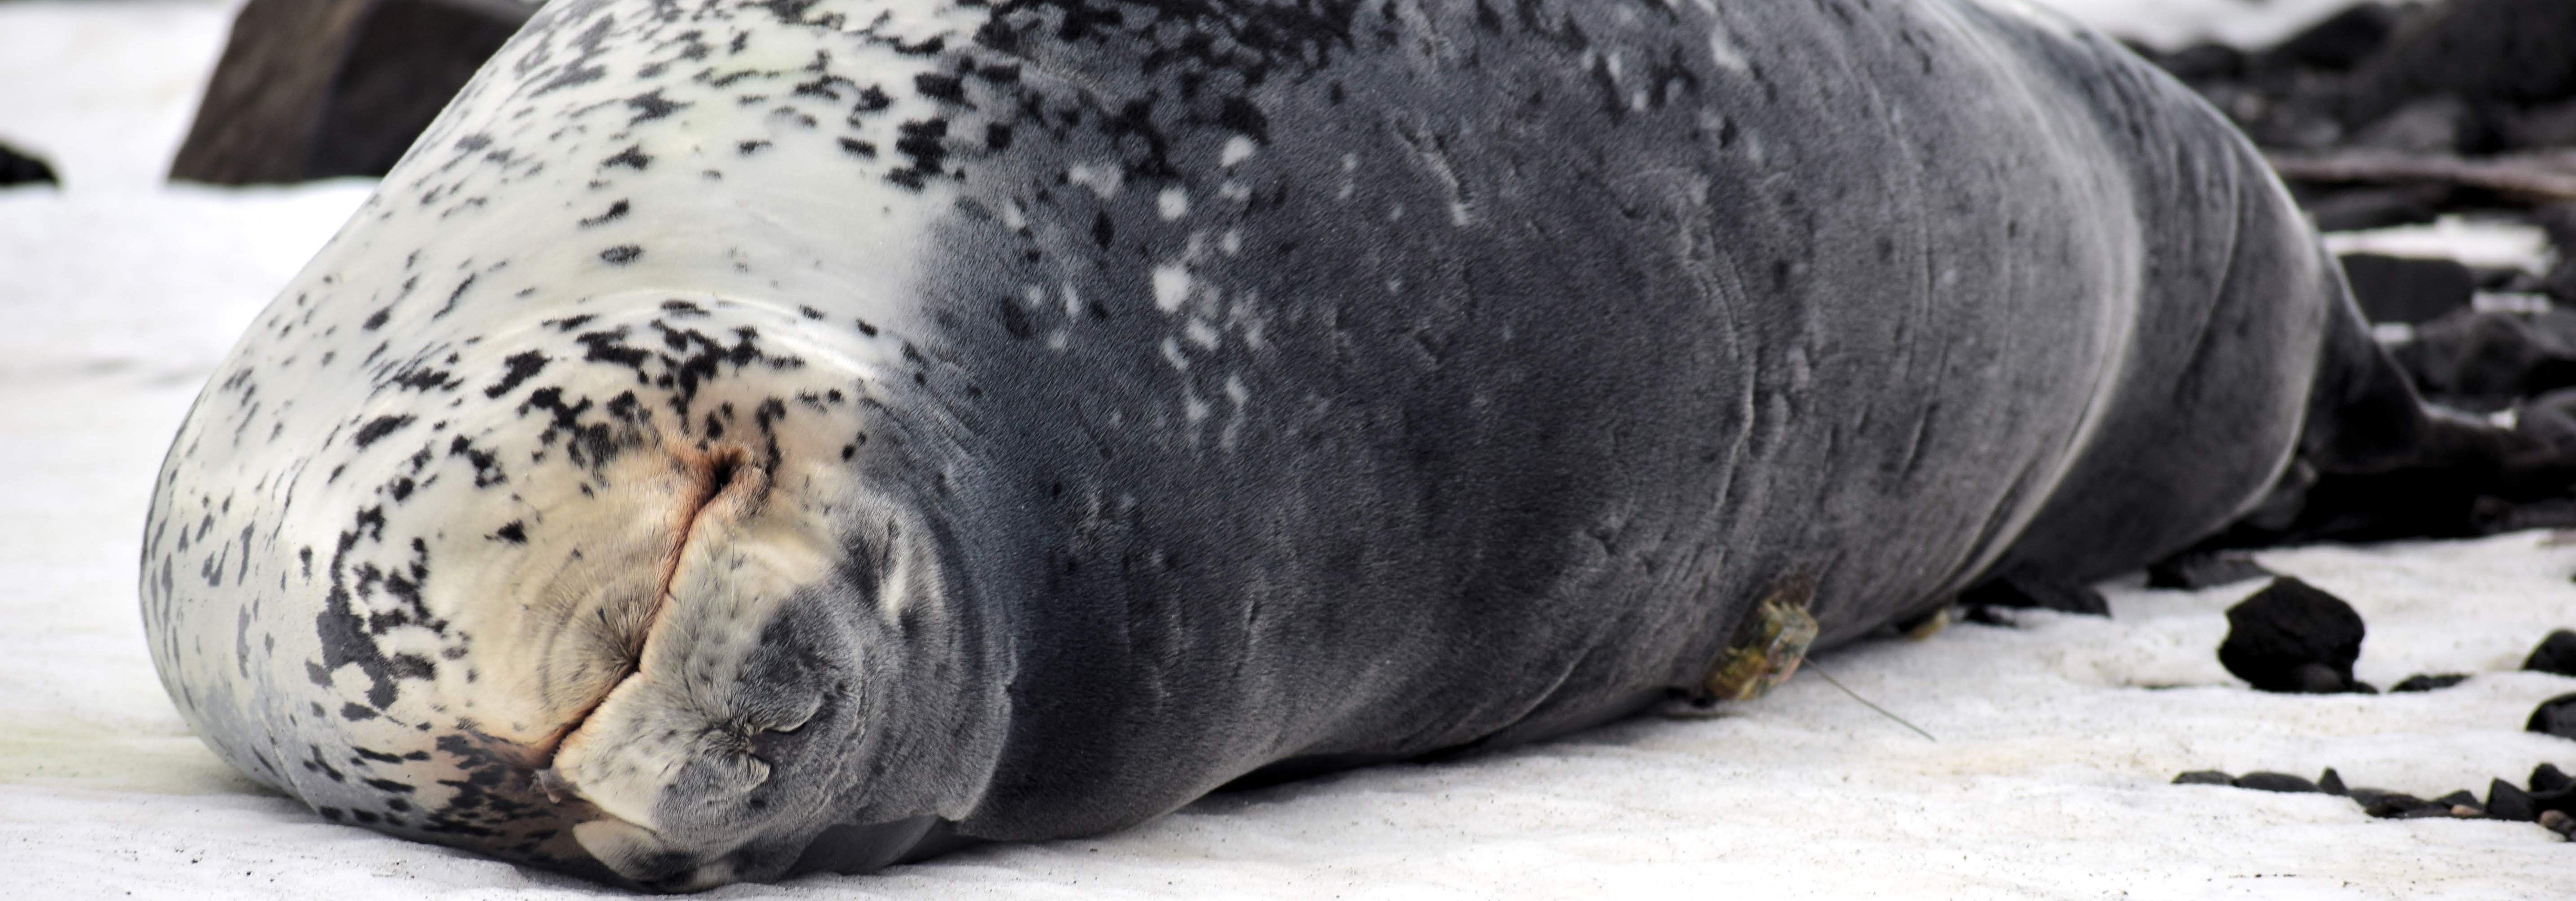 <a href="http://costa.eeb.ucsc.edu/category/antarctica/leopardseals2018/">Leopard Seal Ecology and Physiology</a>